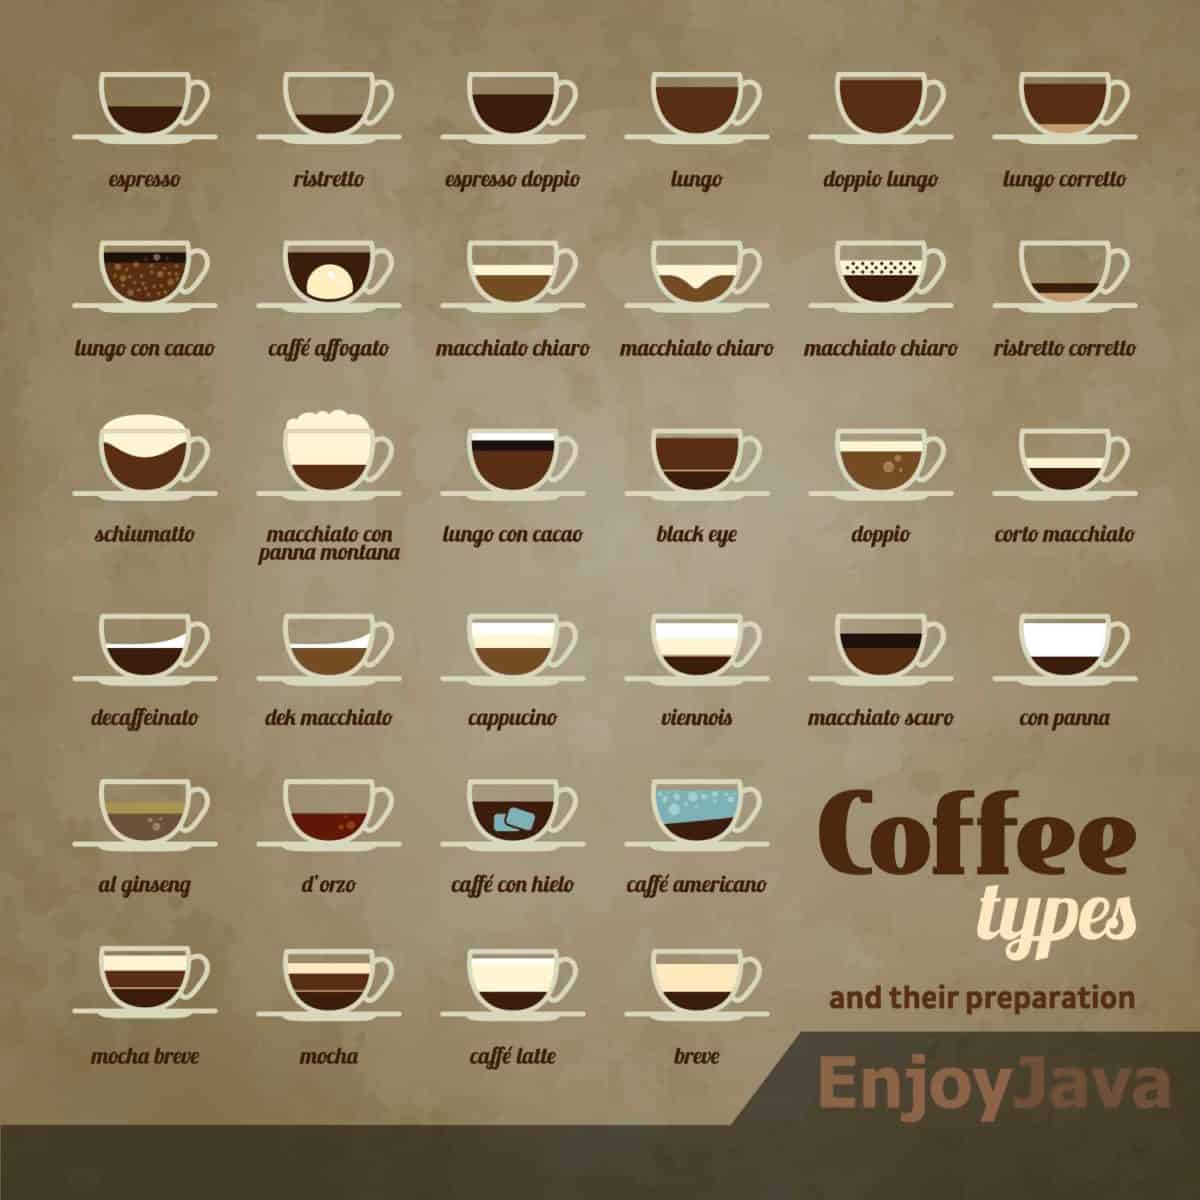 32 types of coffee and preparation